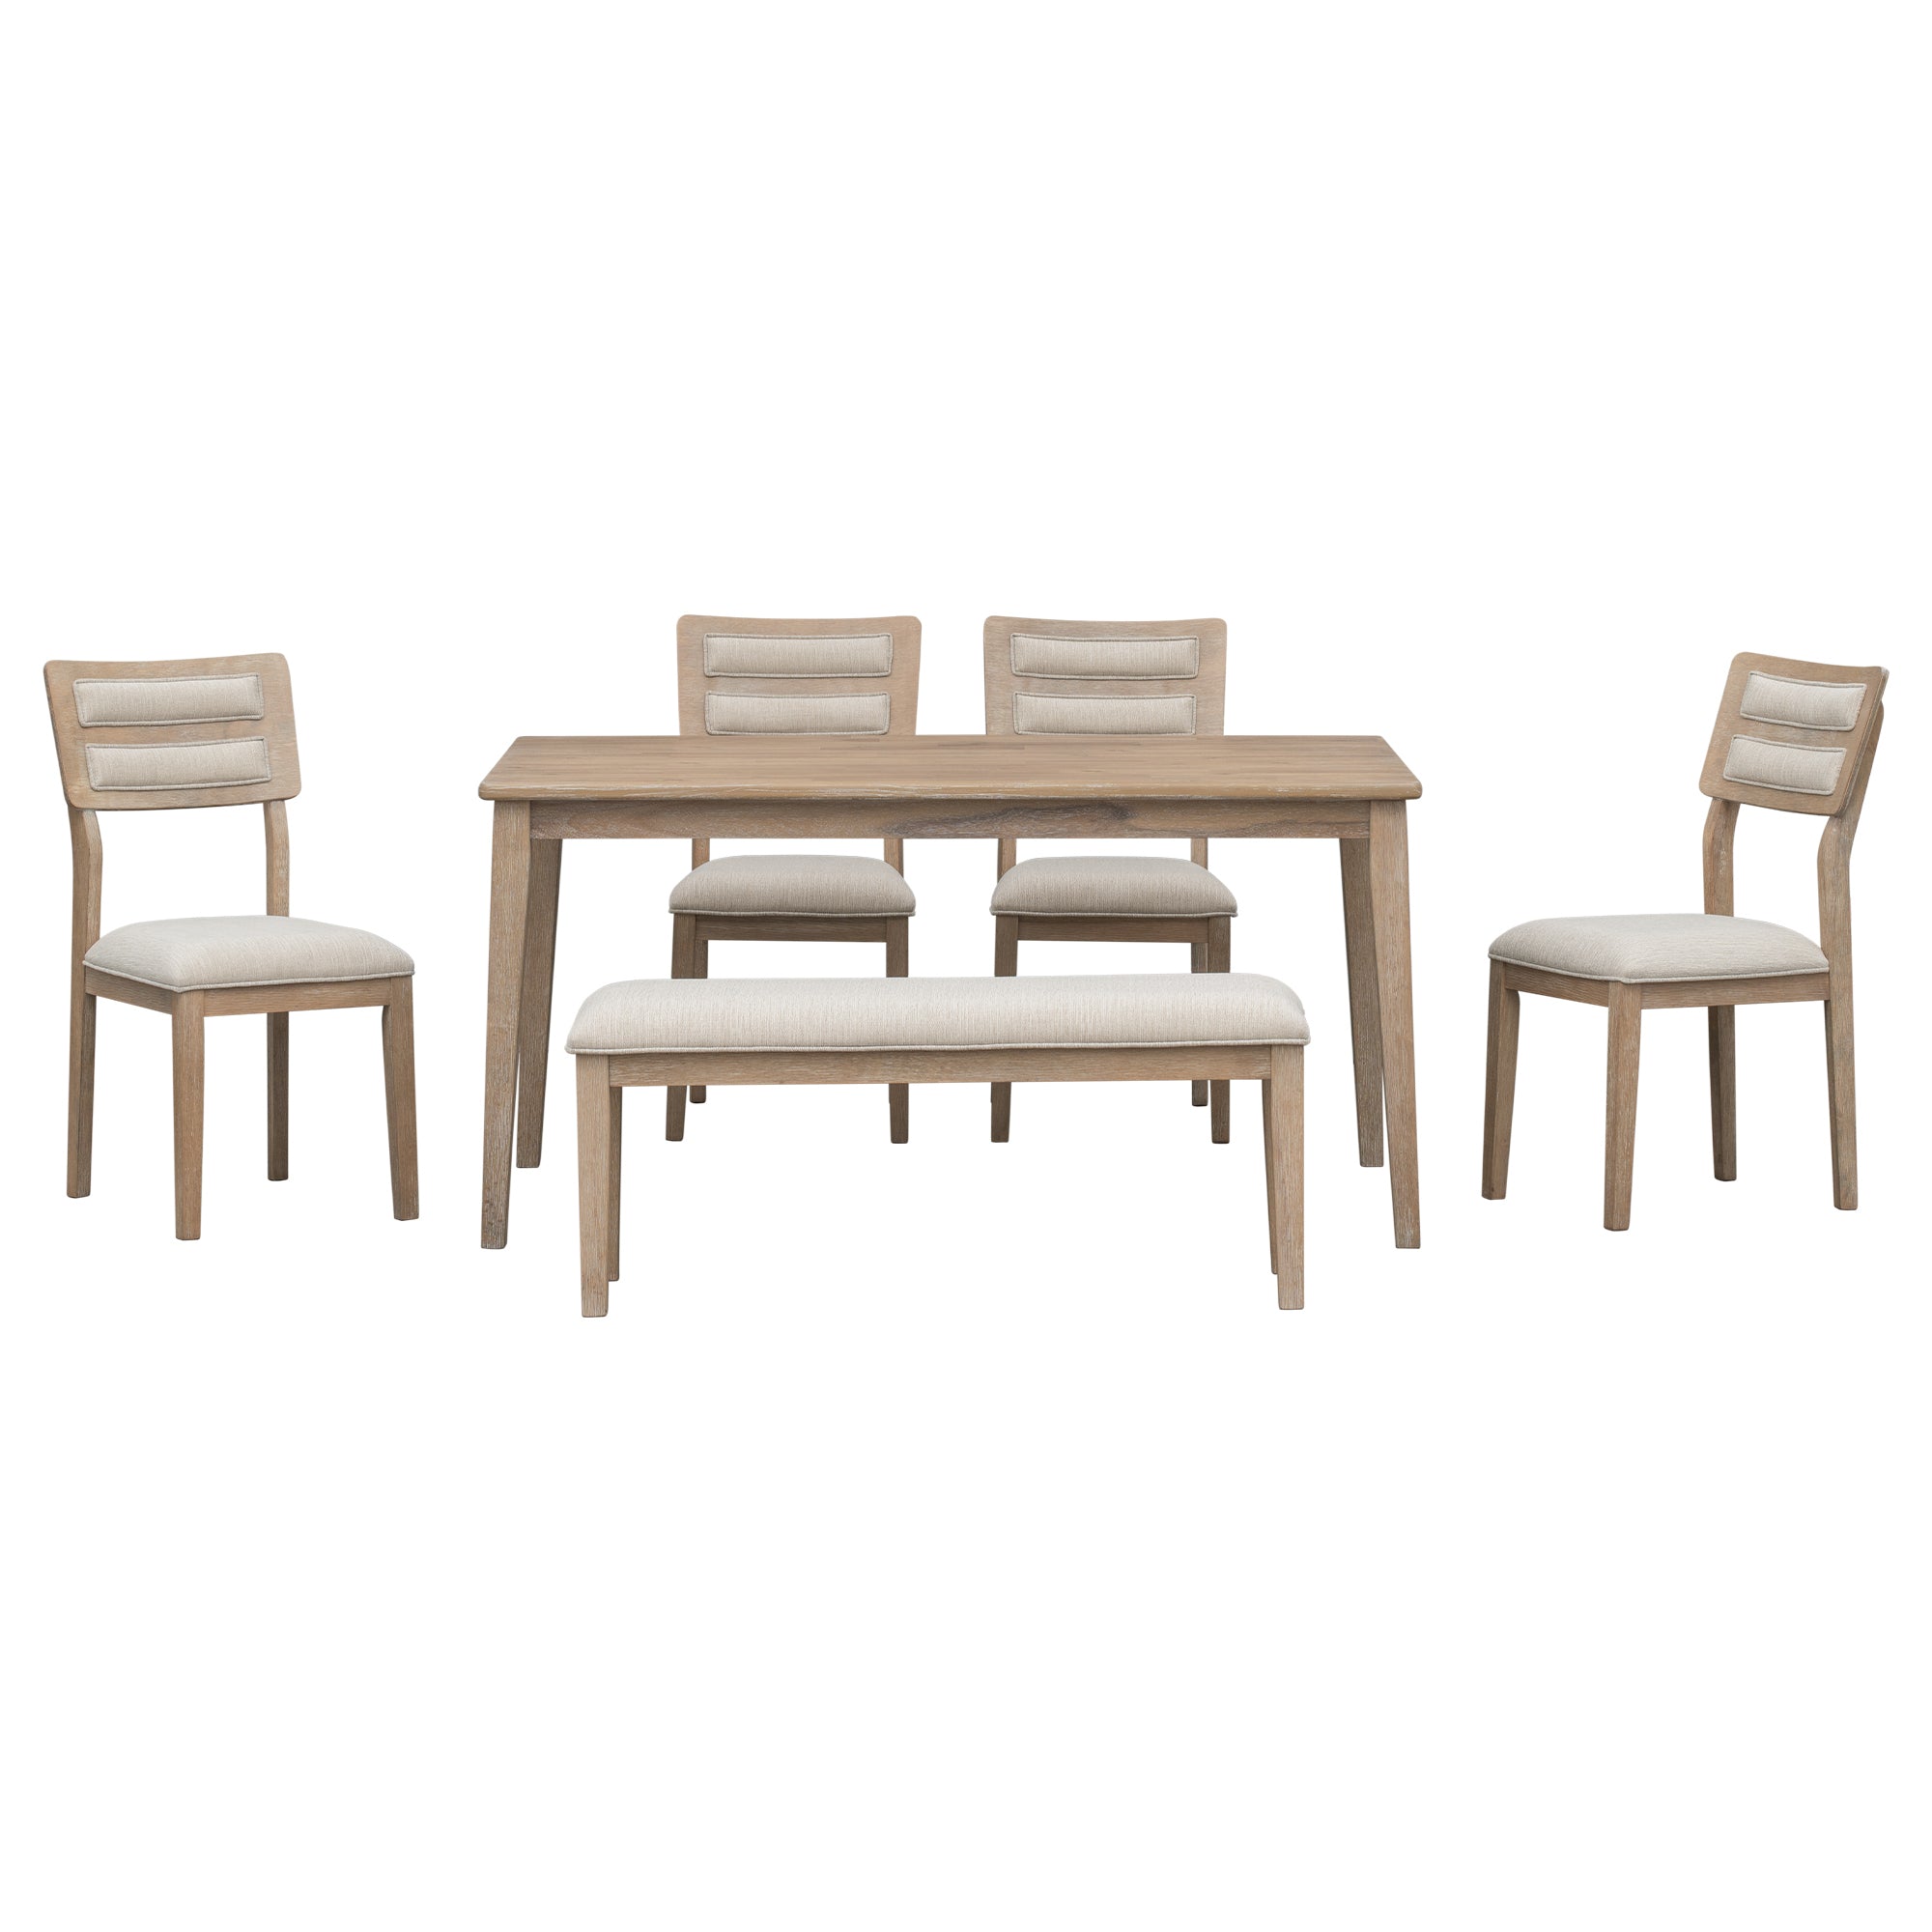 Classic and Traditional Style 6 - Piece Dining Set, Includes Dining Table, 4 Upholstered Chairs & Bench (Natural Wood Wash)